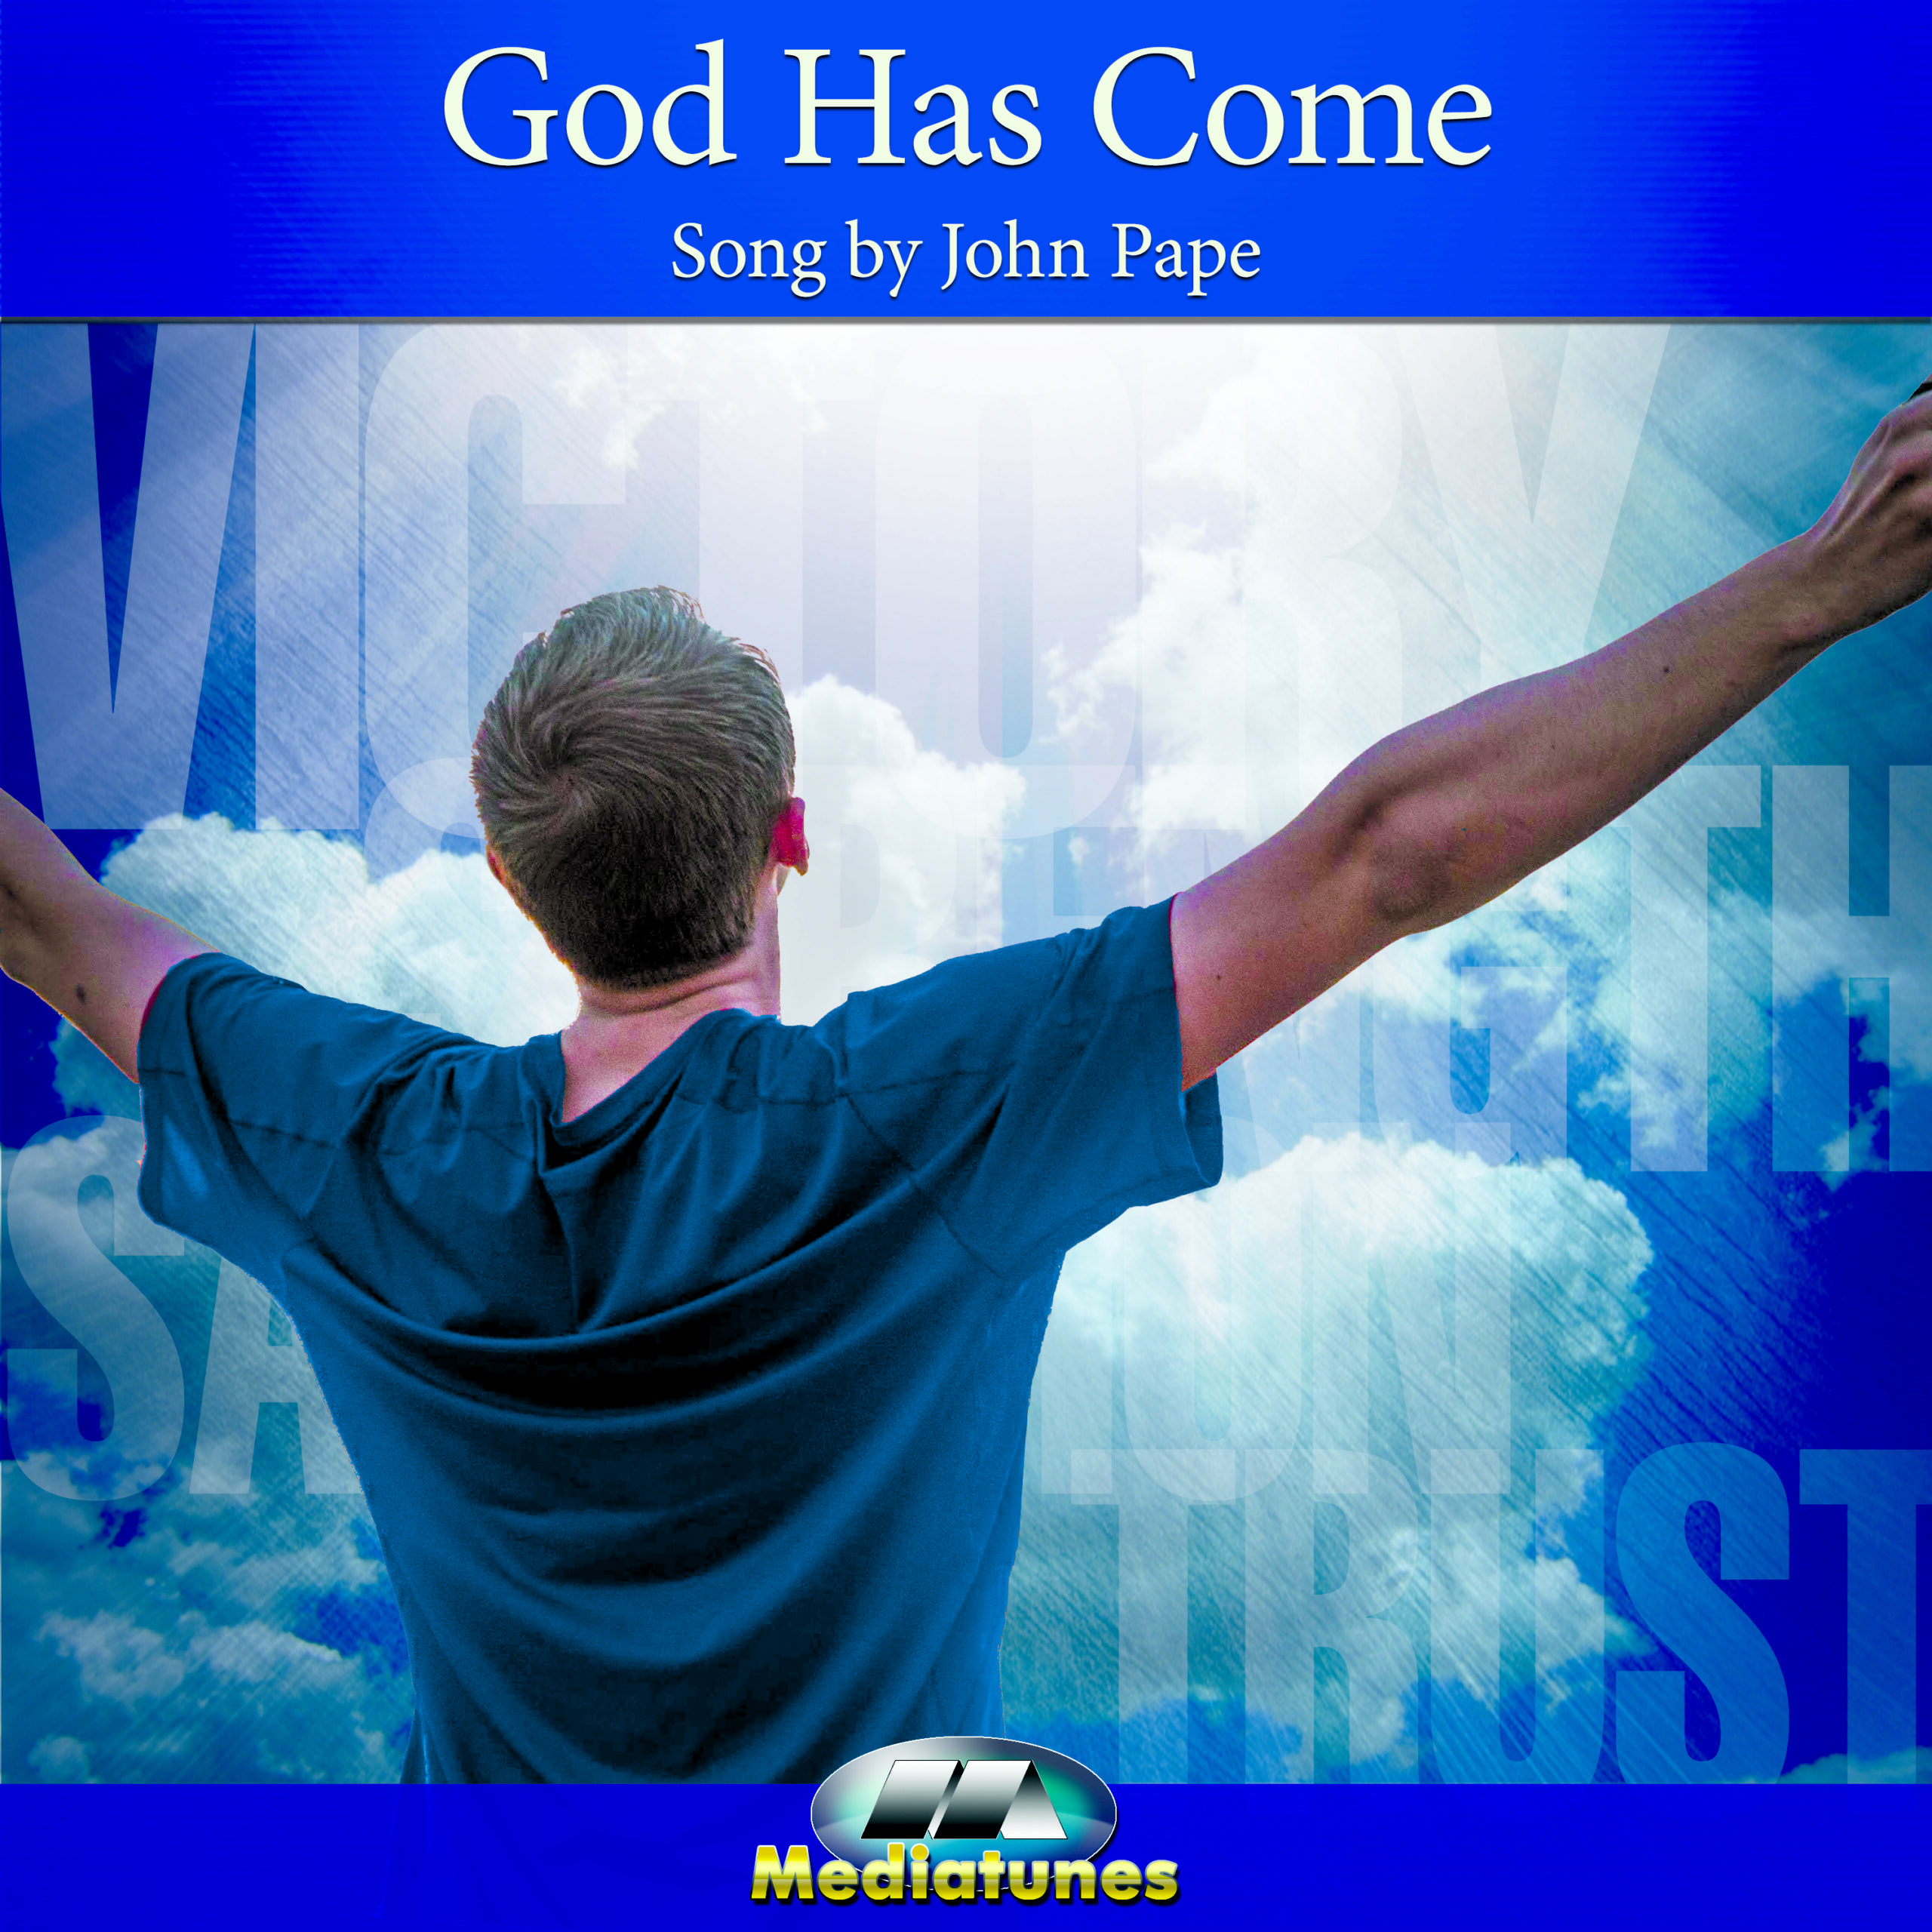 New Song by John Pape, God Has Come, Released March 18th 2022